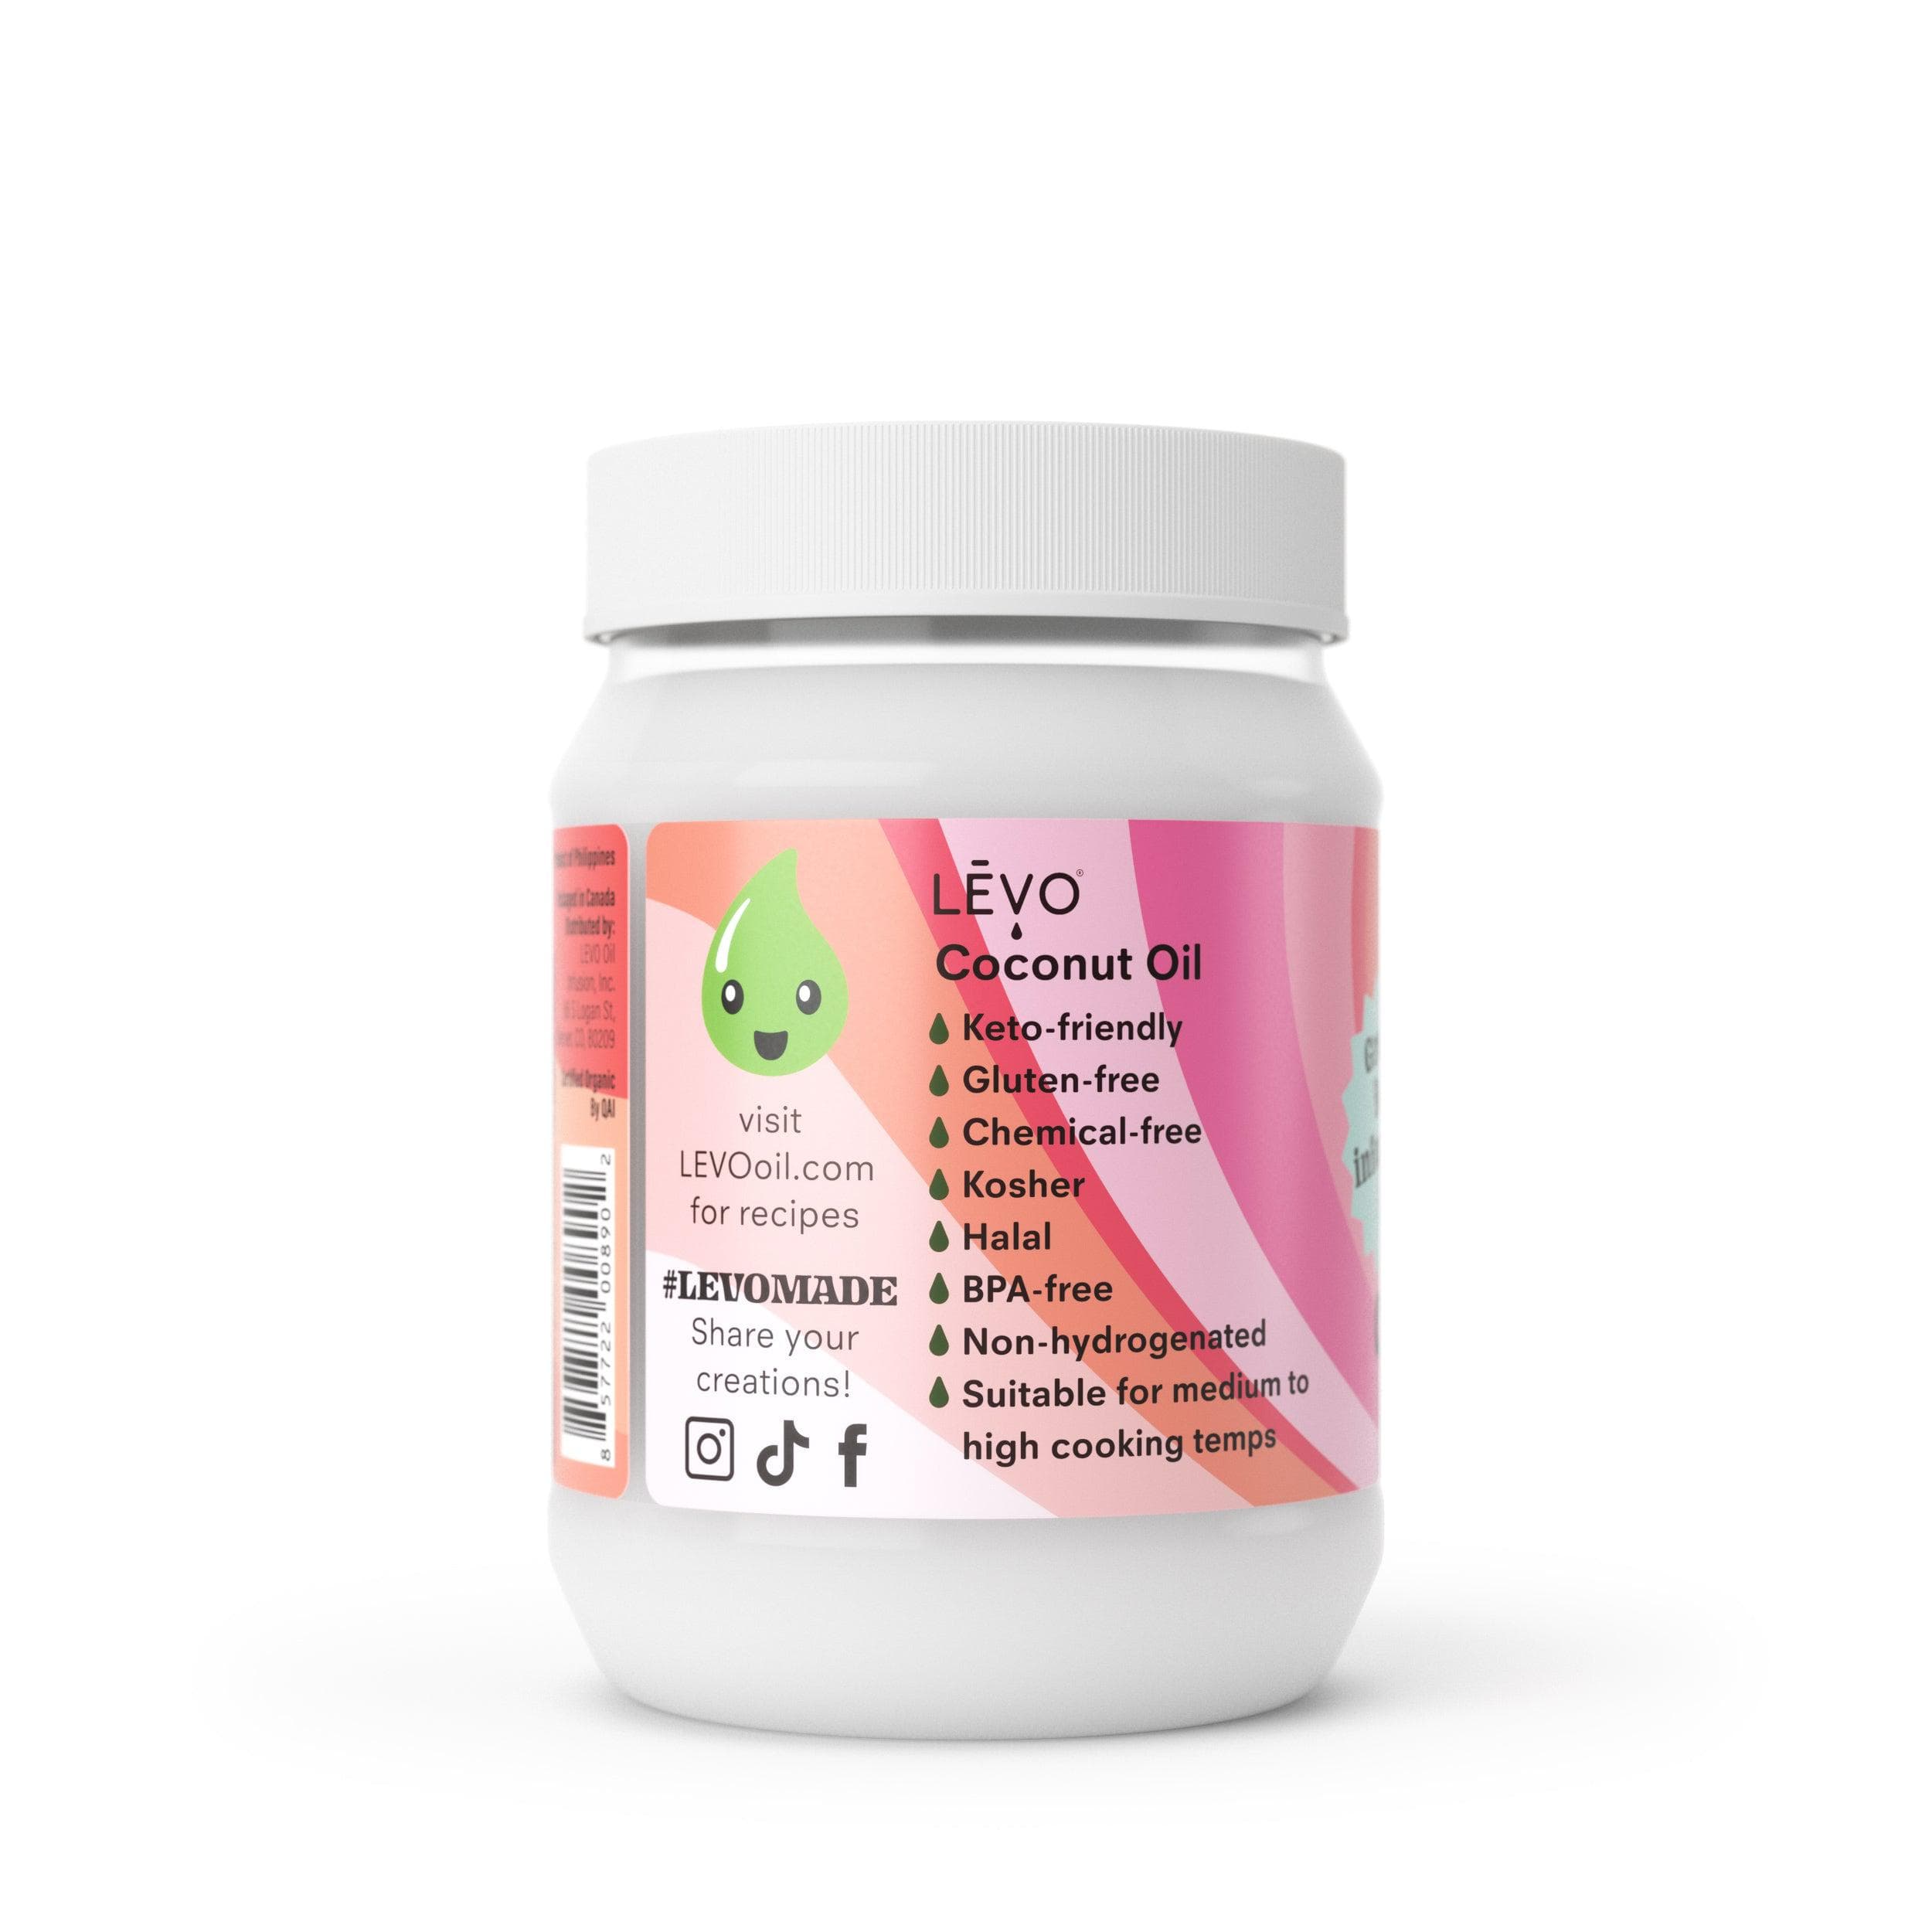 LEVO Coconut Oil is keto-friendly, gluten-free, chemical-free, kosher, halal, BPA-free, non-hydrogenated, and good for cooking at medium to high temperatures. Enhance your recipes with the natural goodness of LĒVO Organic Virgin Unrefined Coconut Oil.